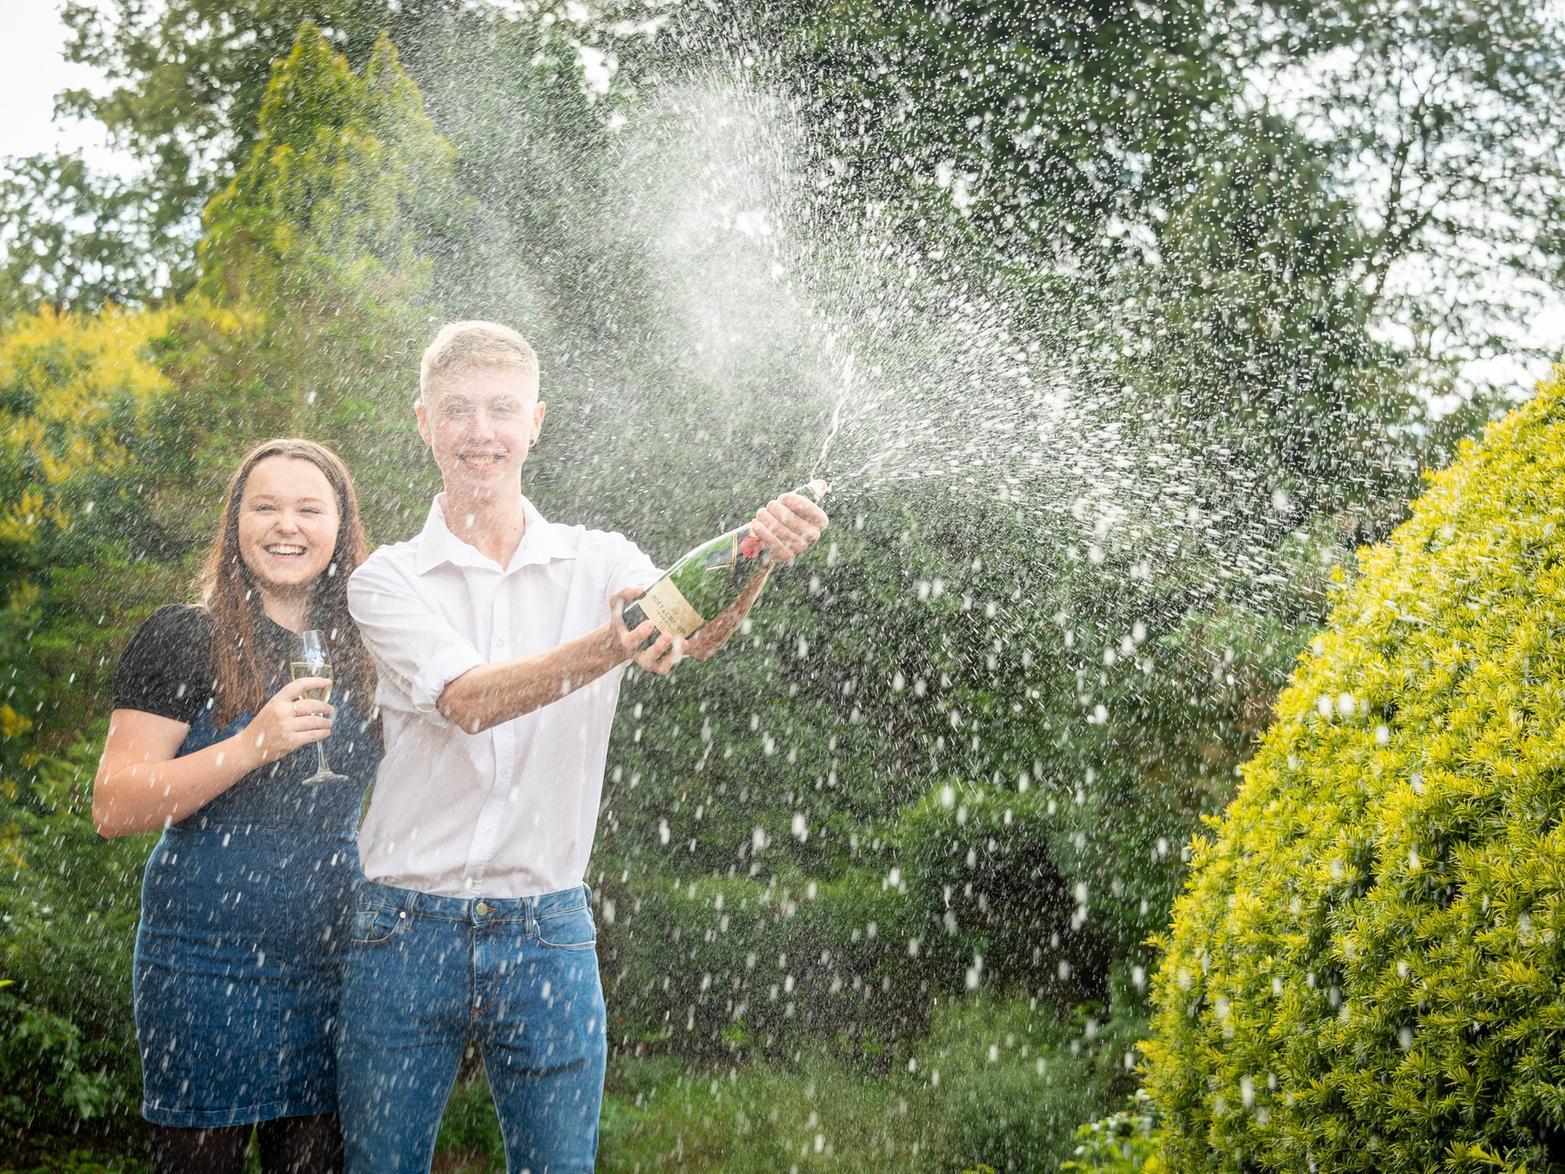 Lottery winner Sam Lawton from Leamington won 120,000 in August after buying his first ever ticket!
He is pictured spraying the Champagne with his partner Connie Bell. 
The former Campion School pupil Sam, 19, was a winner of the 10,000 a month for 12 months 'Set For Life' draw and said the 120,000 prize has come at the "best possible time" for him and his young family.